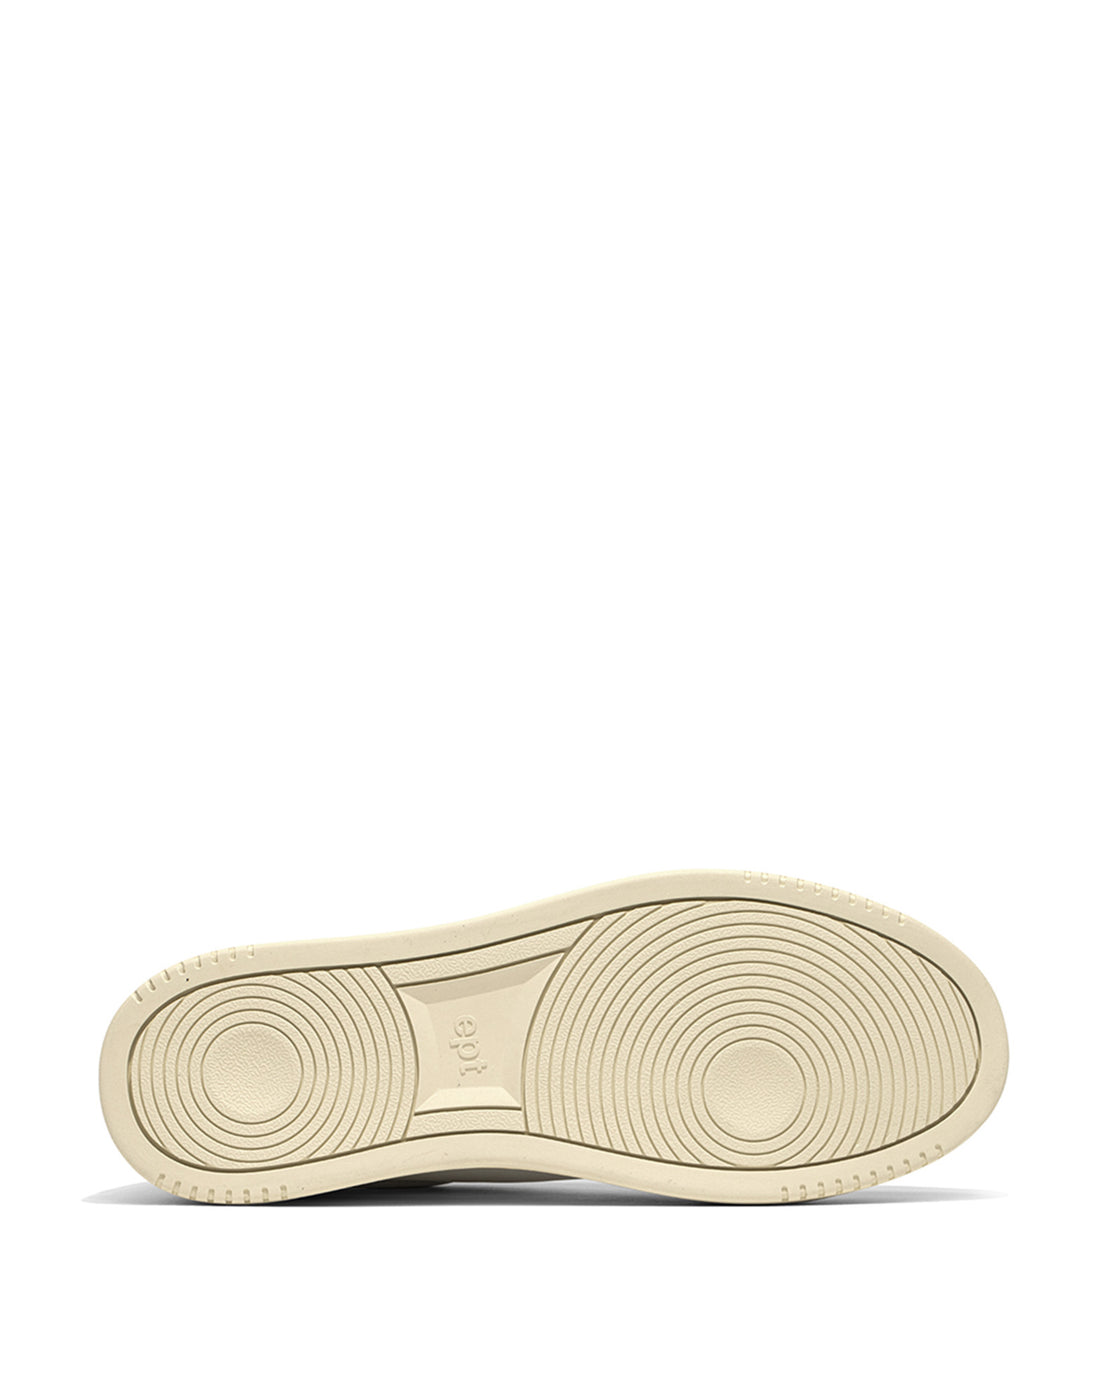 EPT Sneakers Court Off White/Beige